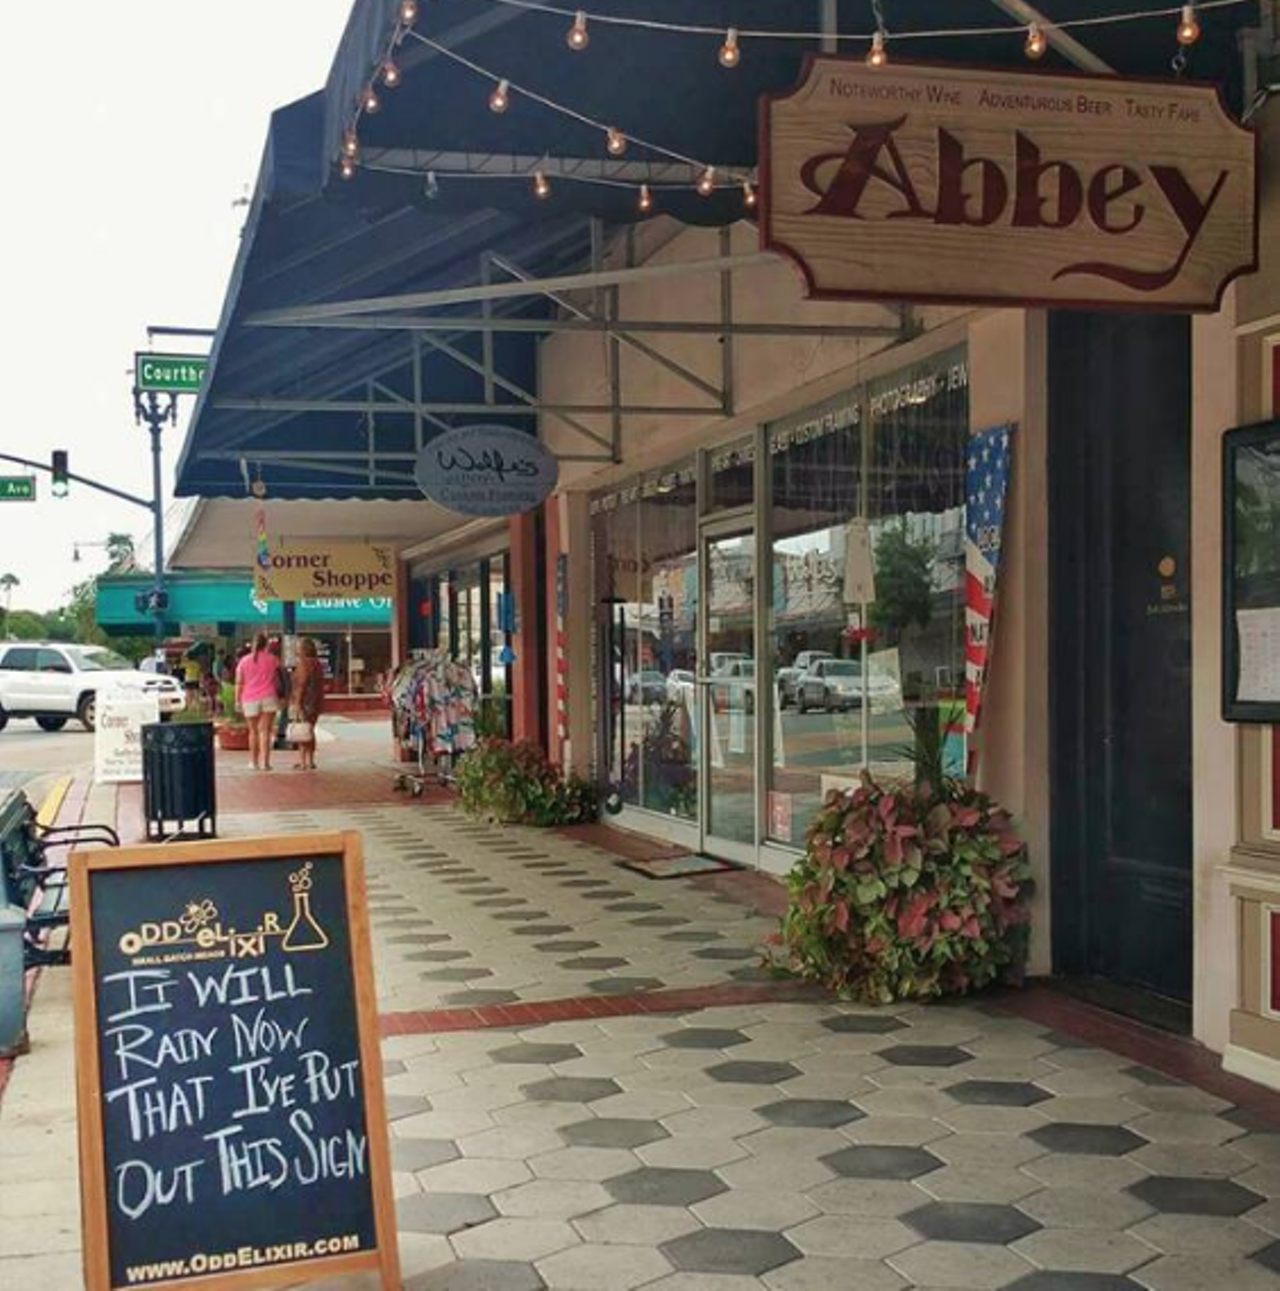 Summer Sour Fest
Abbey Bar - 117 North Woodland Boulevard, DeLand, August 27, 2-6 p.m.
If sour beers are your thing, check this festival out. This first-ever annual event has samples from over ten breweries and counting. Tickets go for $35 in advance, and $45 at the gate. 
Photo via Abbey Bar/Facebook